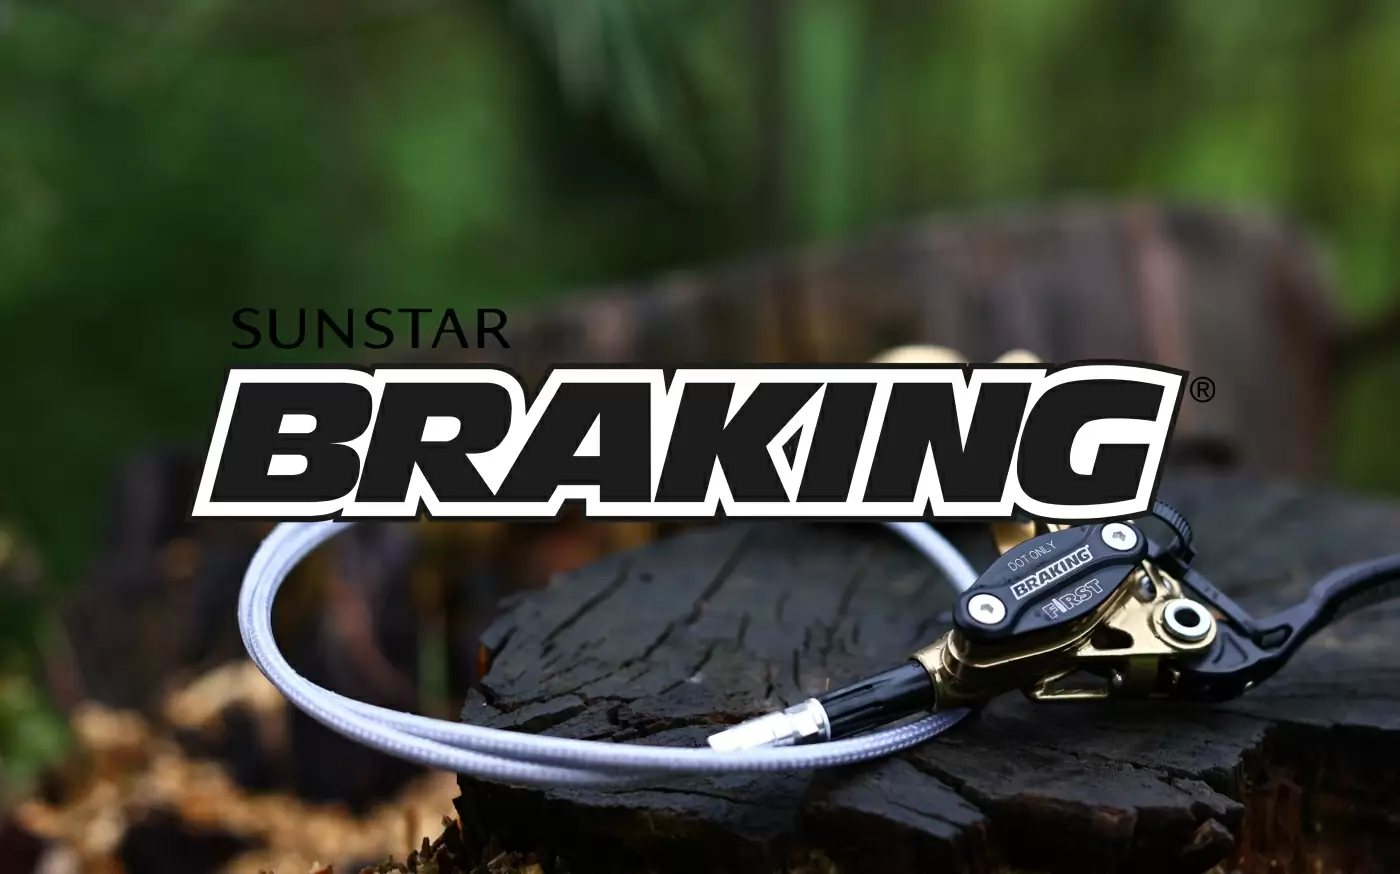 Introducing the new Braking F.I.R.S.T. - image